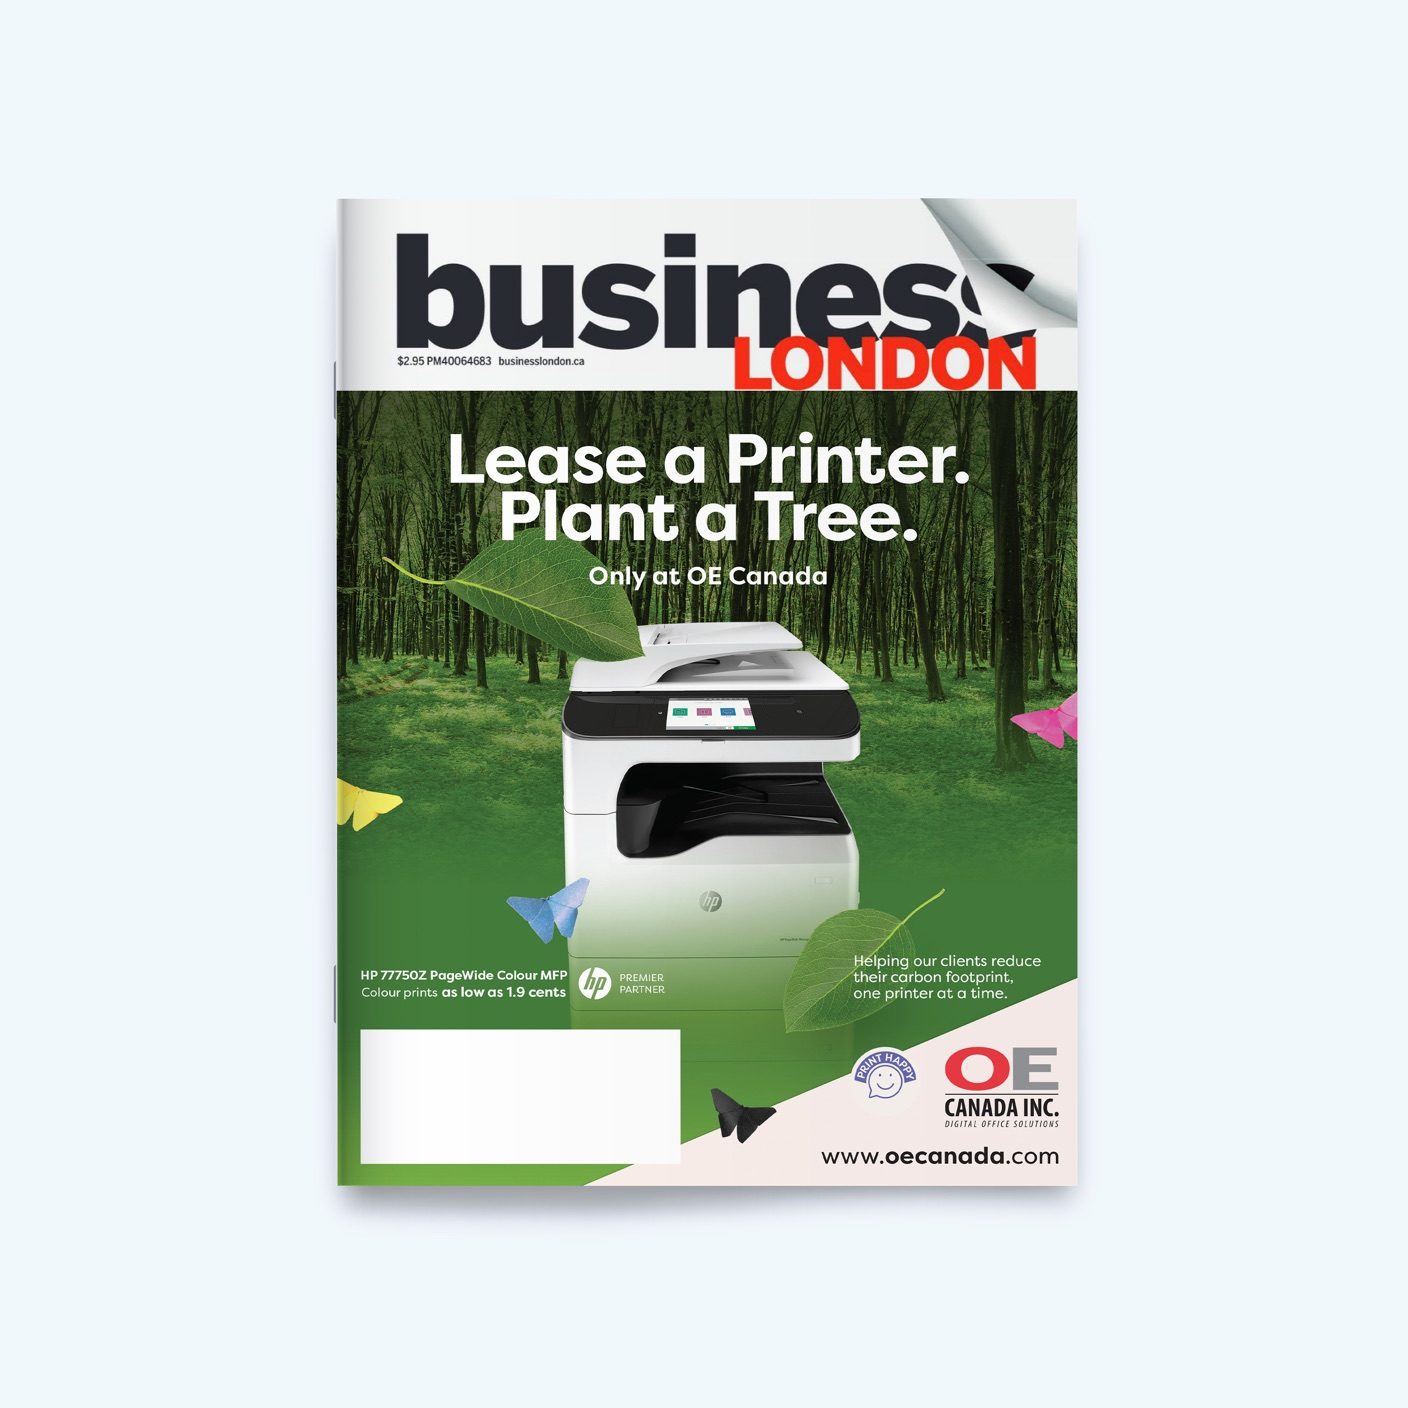 Business London Magazine with the front cover showing an OE Canada Advertisement with an industrial printer with a scenic background